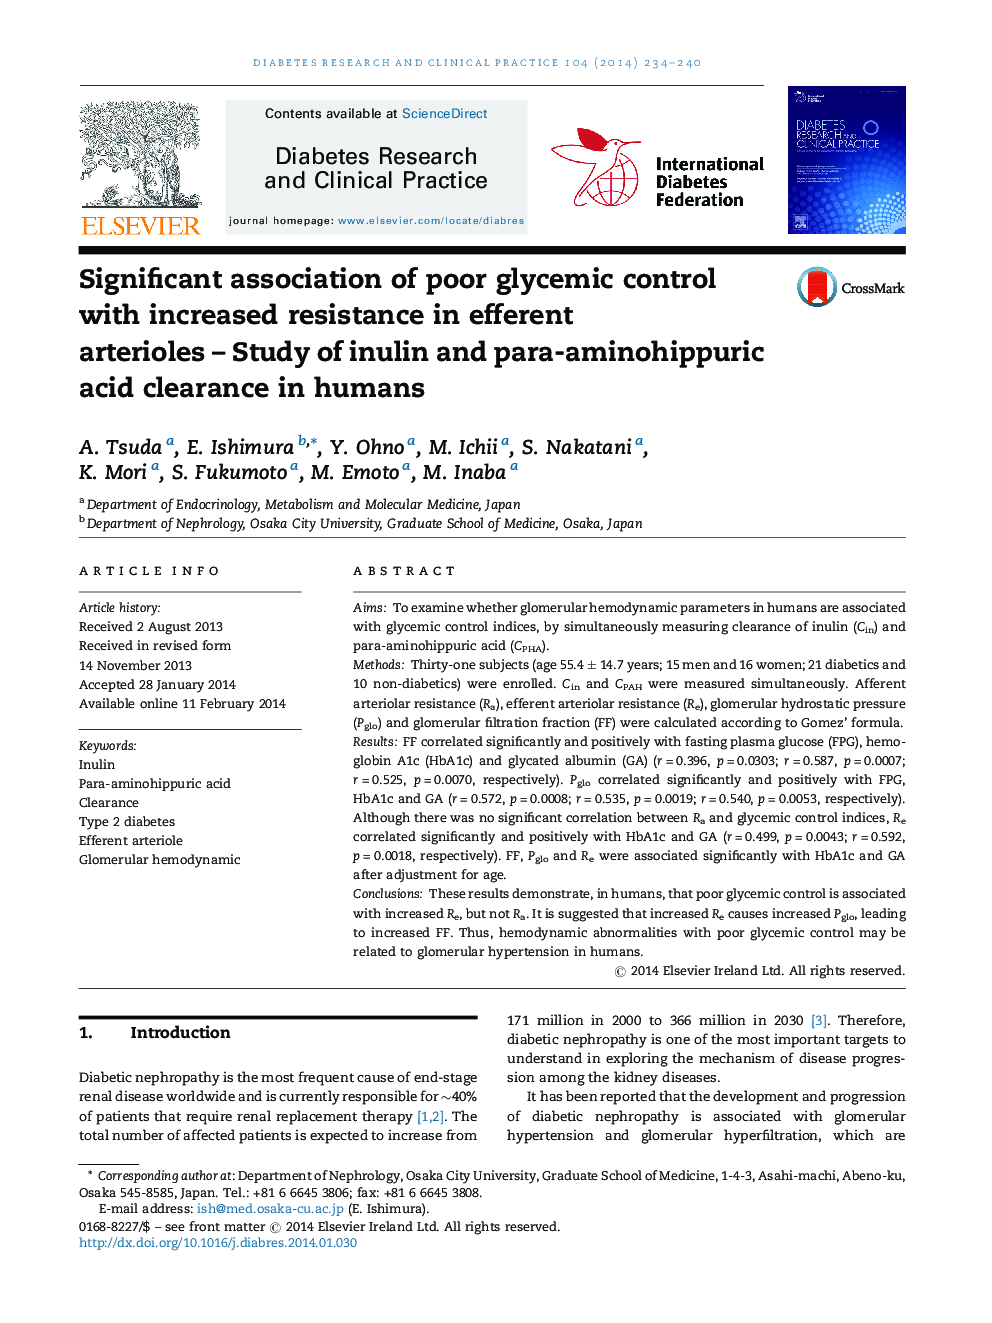 Significant association of poor glycemic control with increased resistance in efferent arterioles - Study of inulin and para-aminohippuric acid clearance in humans